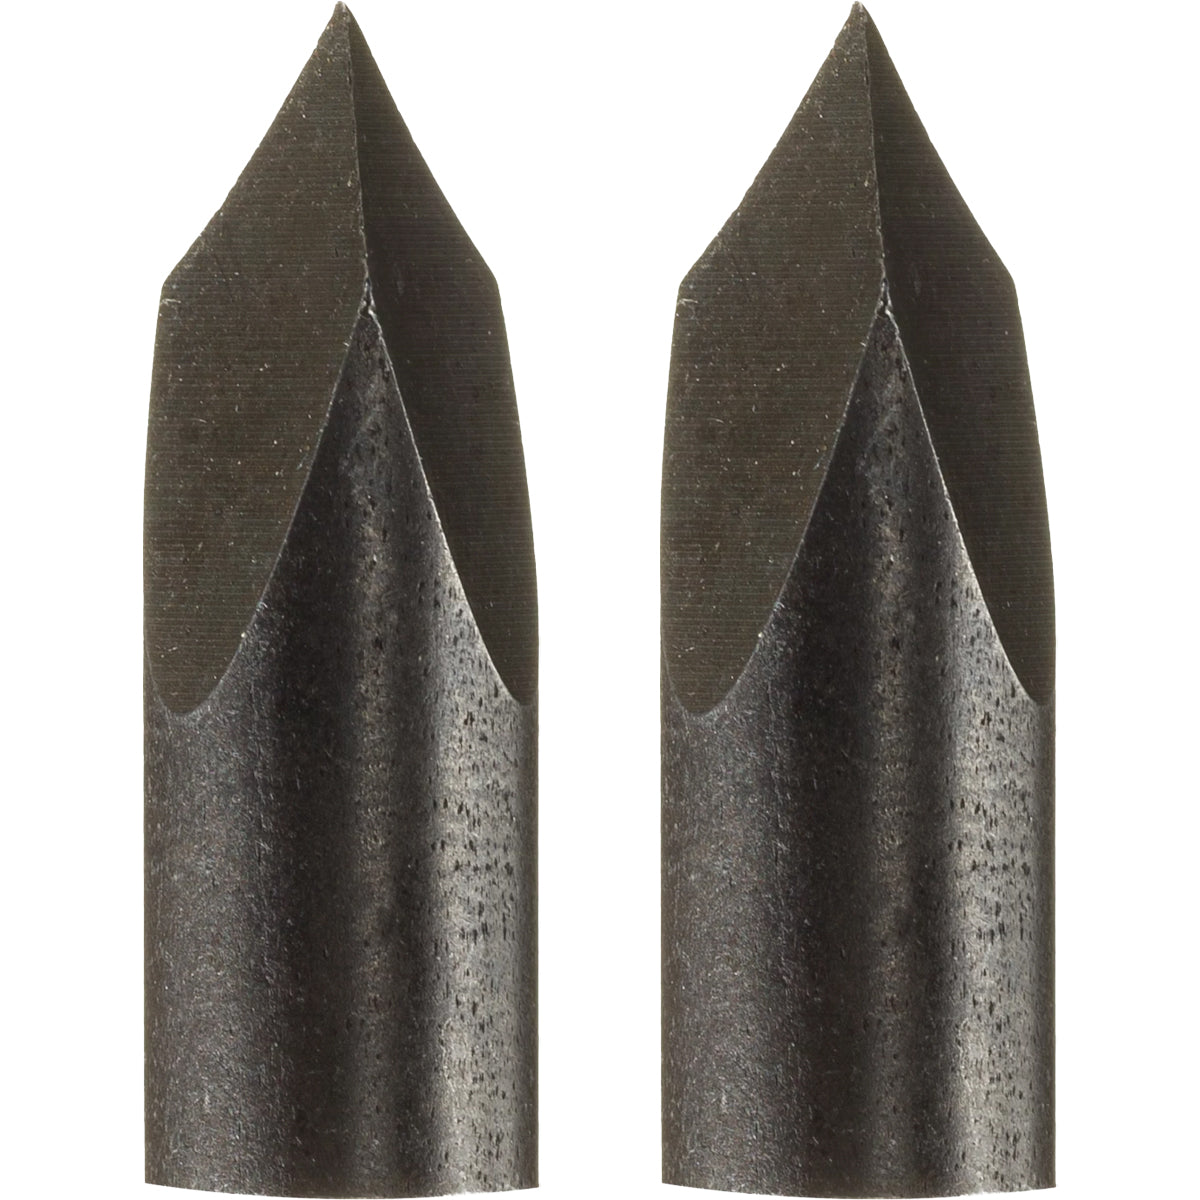 Muzzy Bowfishing Gar Point Replacement Tips 2-Pack Muzzy